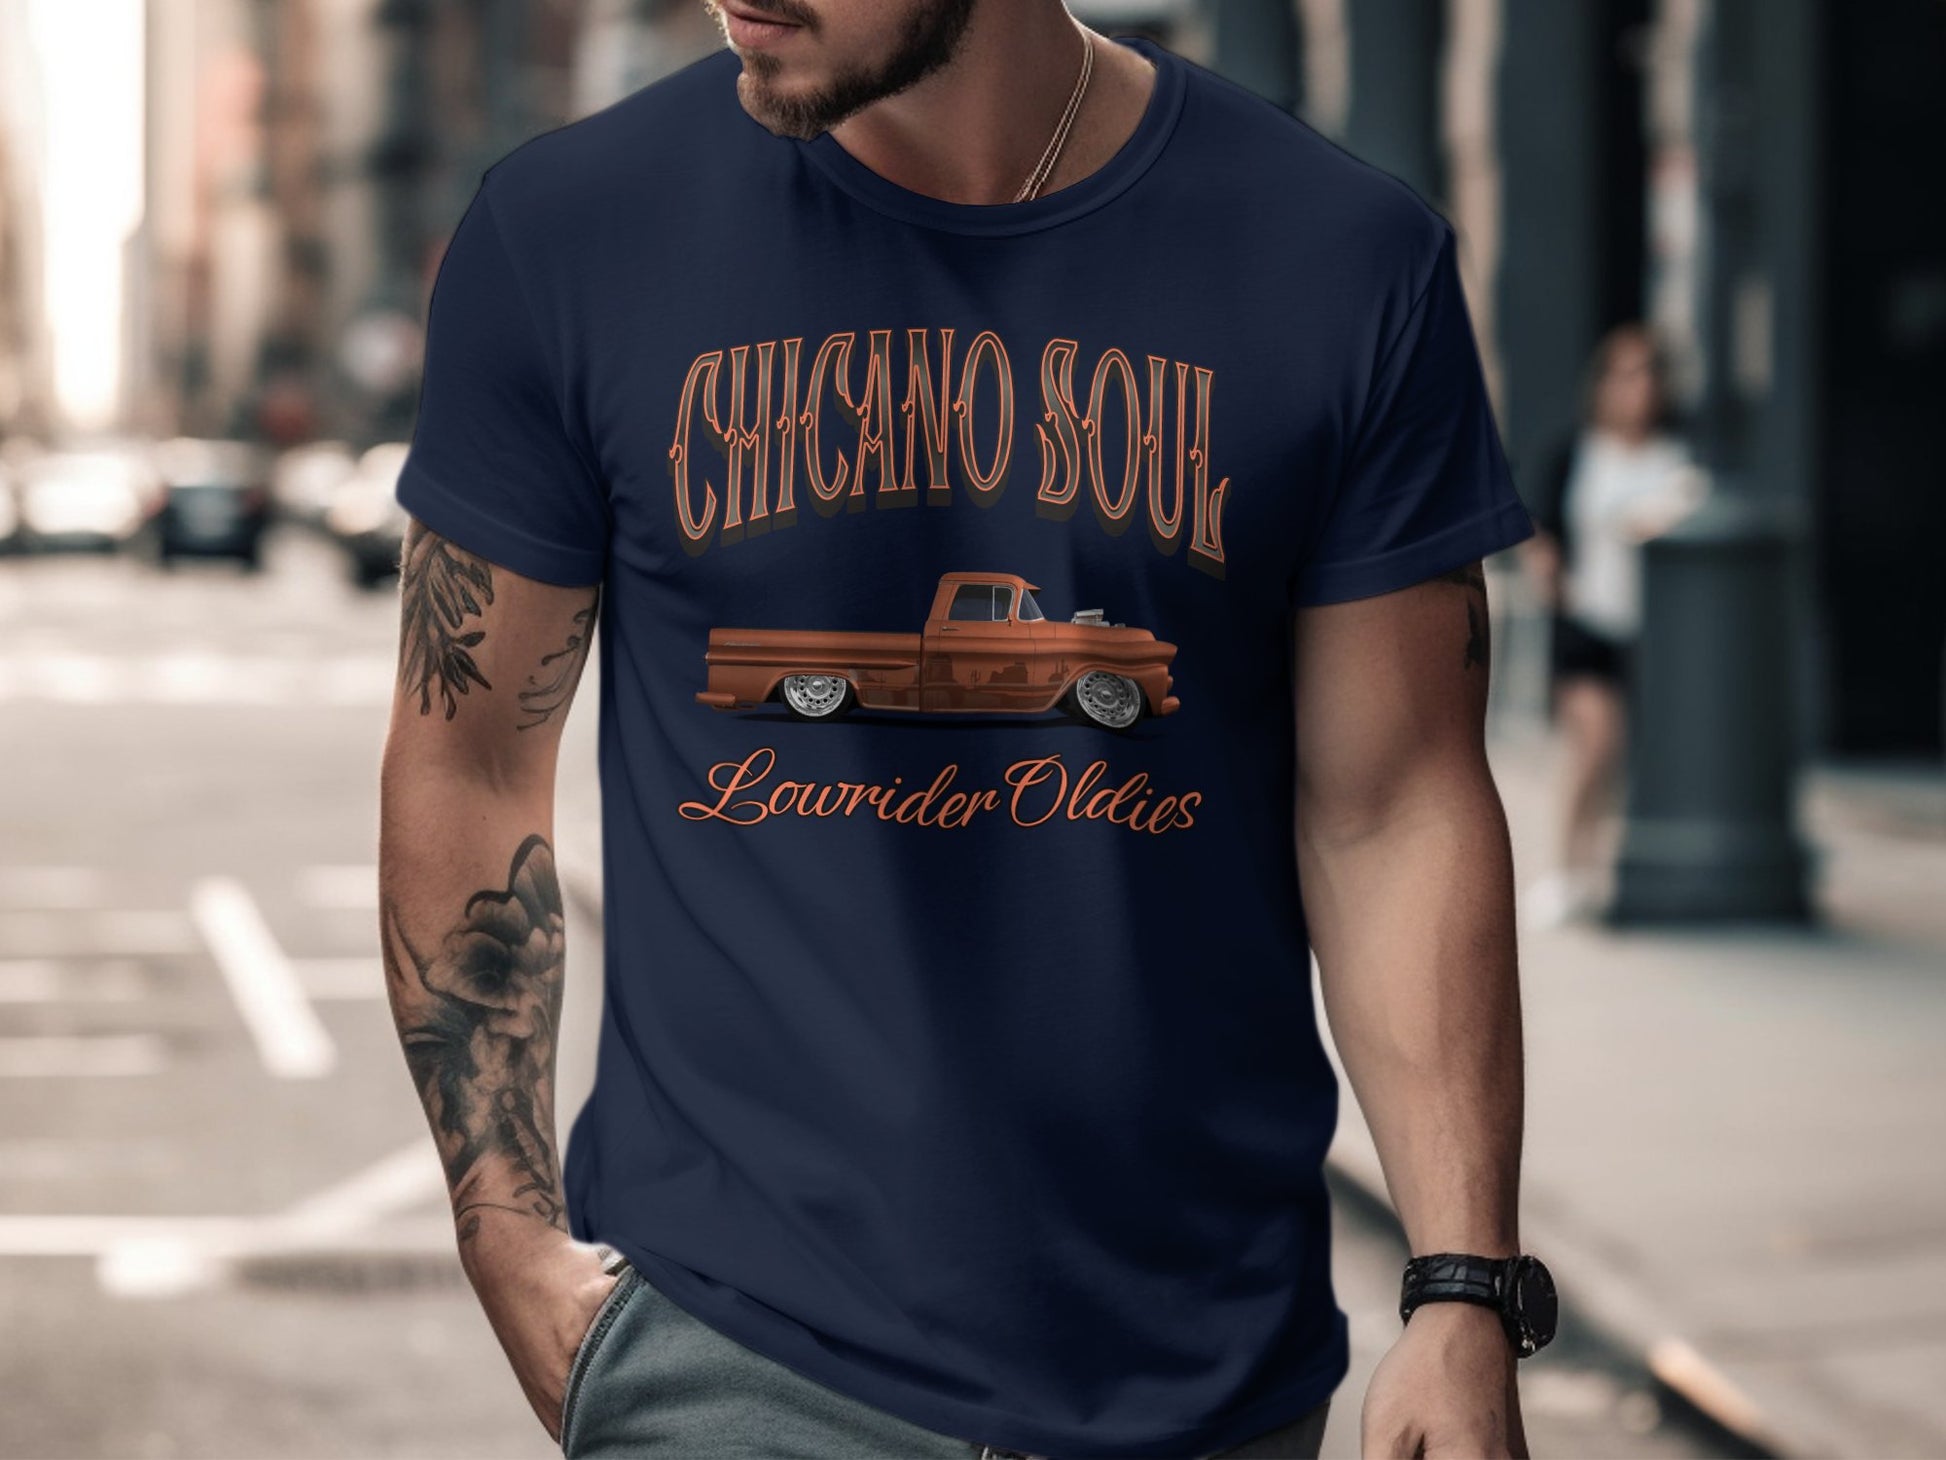 Chicano Soul Lowrider Oldies Vintage Truck Graphic Tee, Classic Car T-Shirt, Retro Style Apparel - Mardonyx XS / Navy